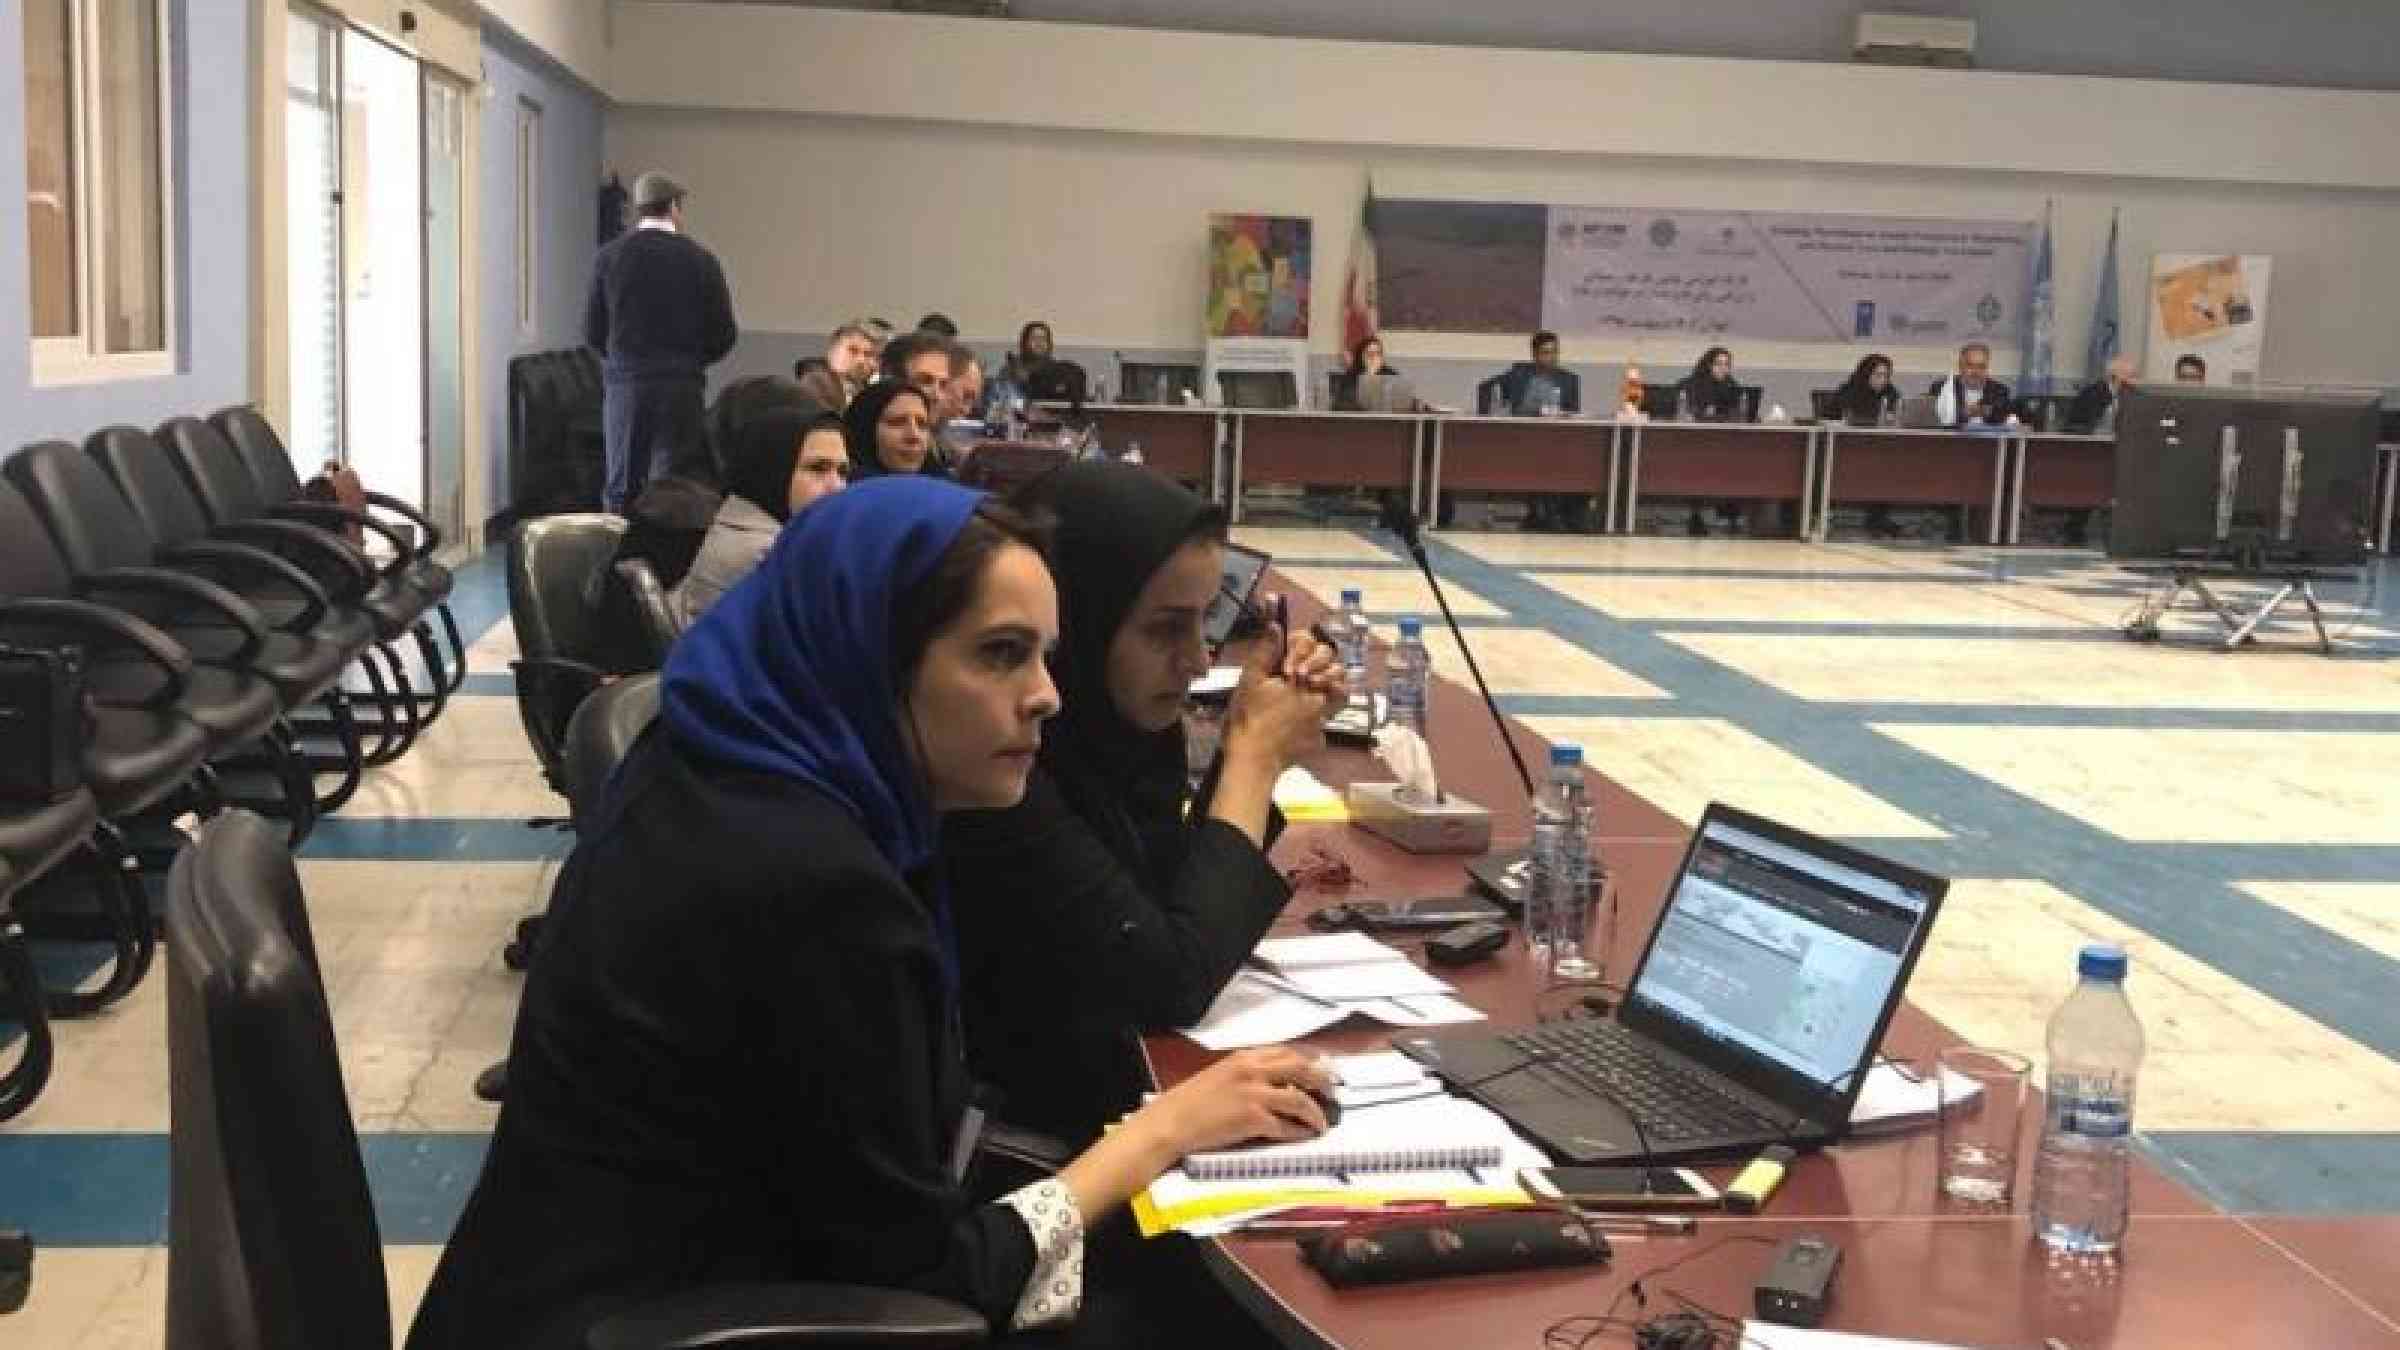 The training workshop in Tehran brought together participants from central and local government, UN, humanitarian organizations, academia and the media (c) UNDRR